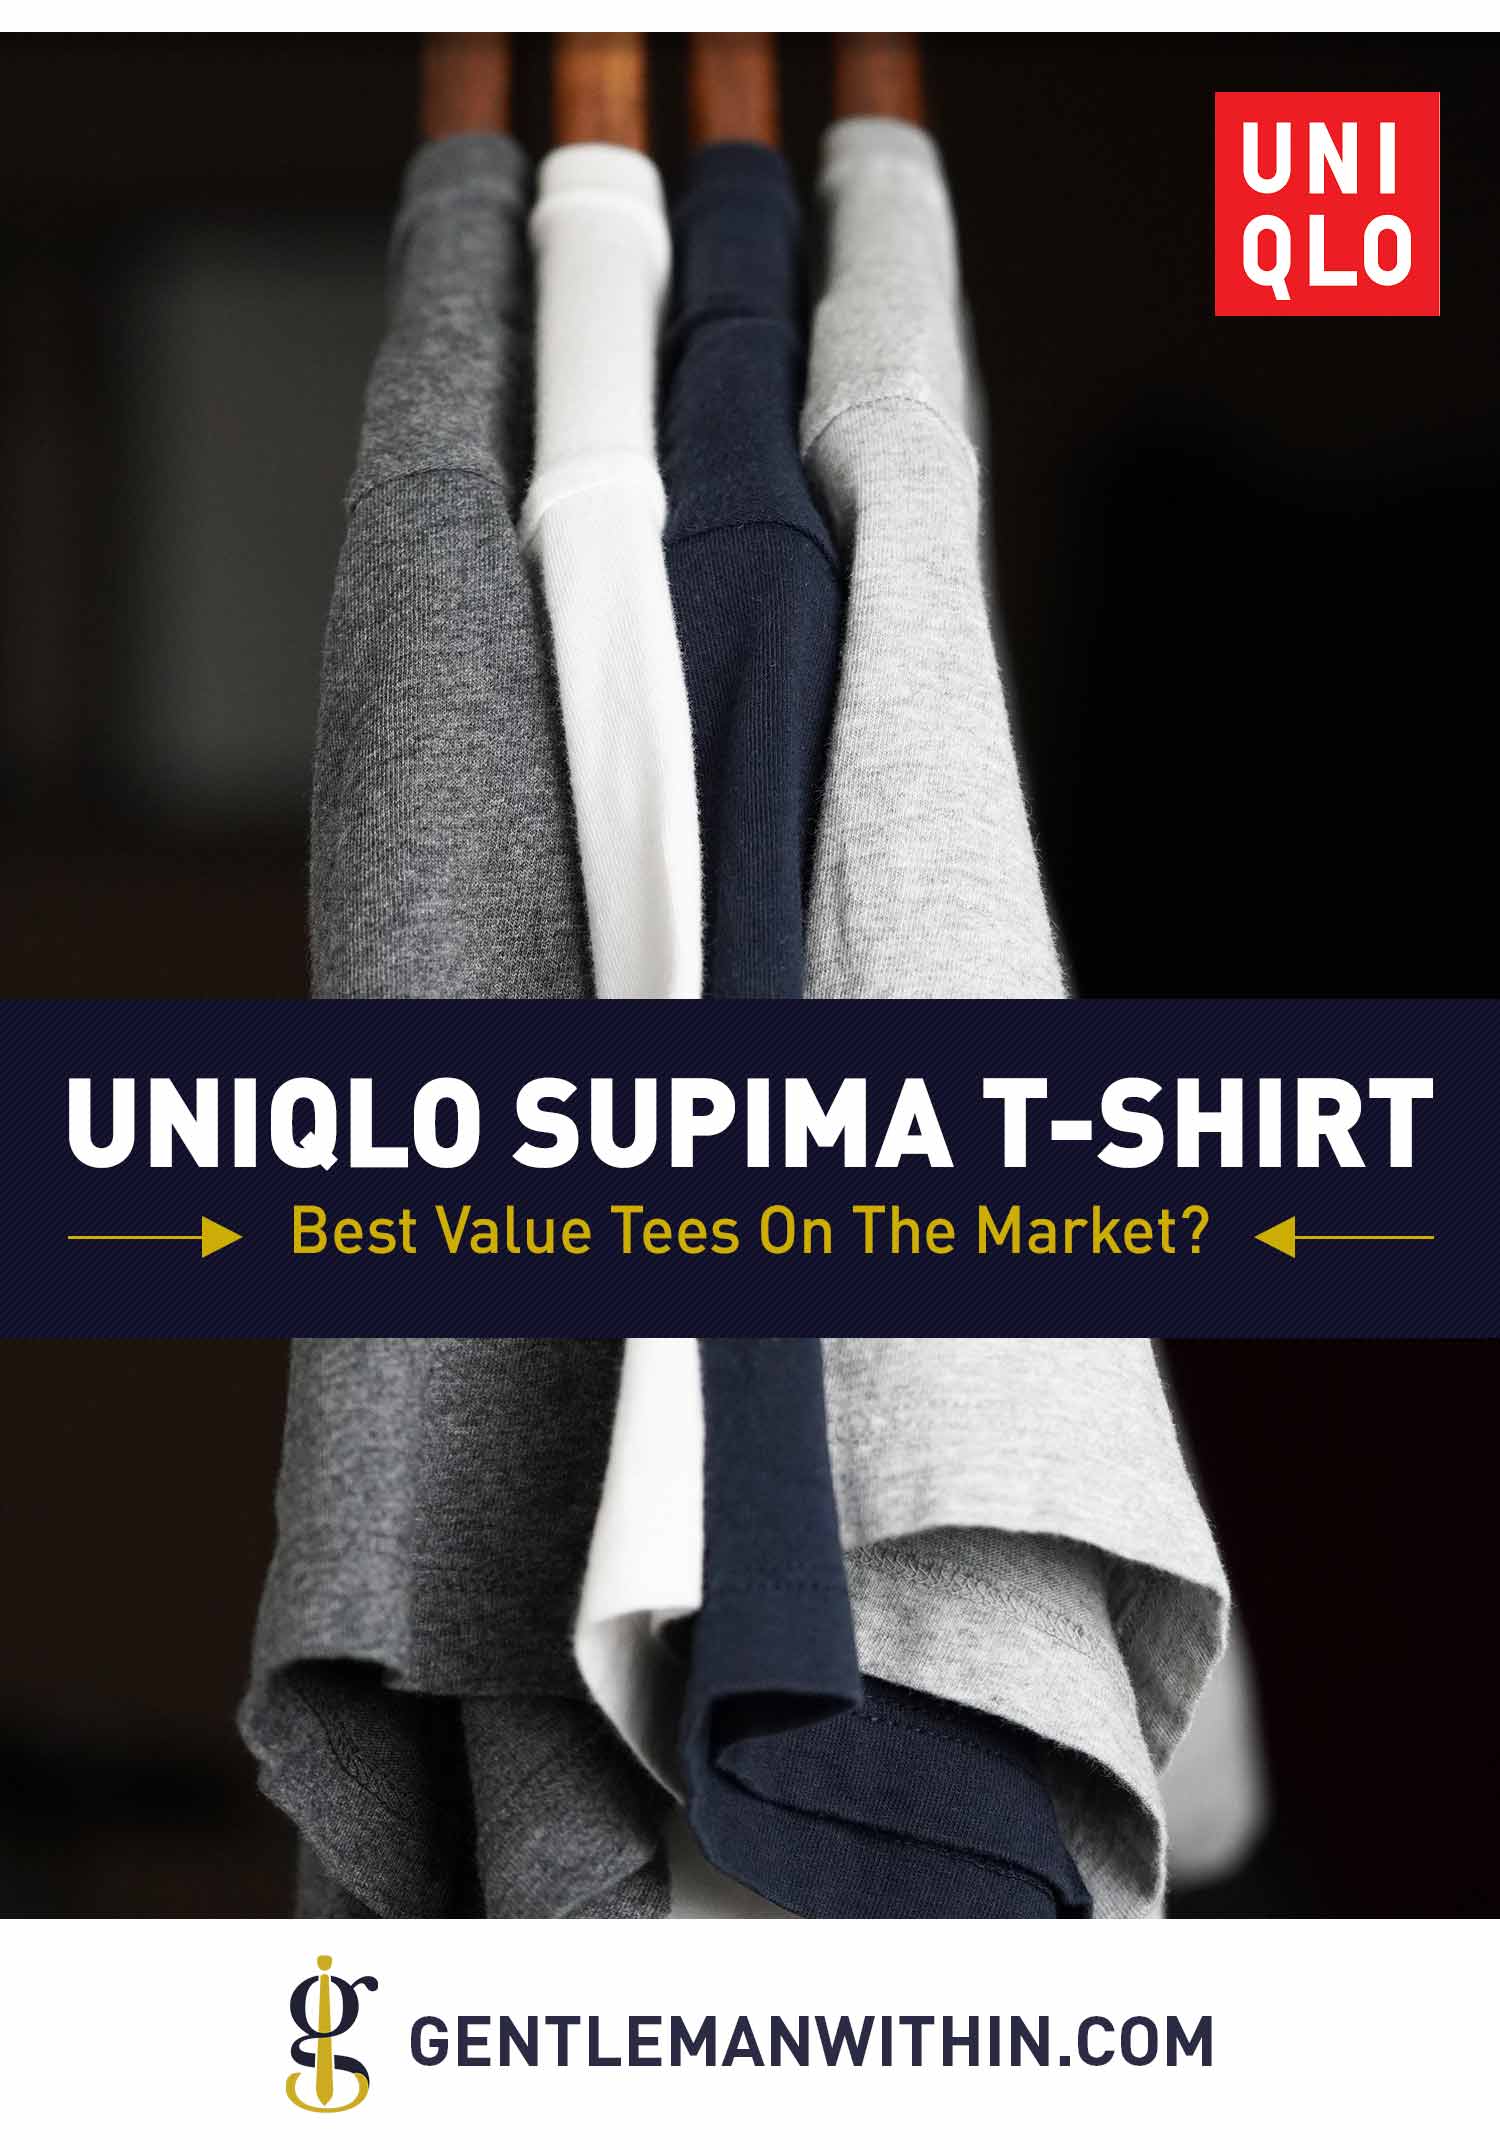 UNIQLO Supima Cotton T-Shirt Review (Best Value Tees?) | GENTLEMAN WITHIN